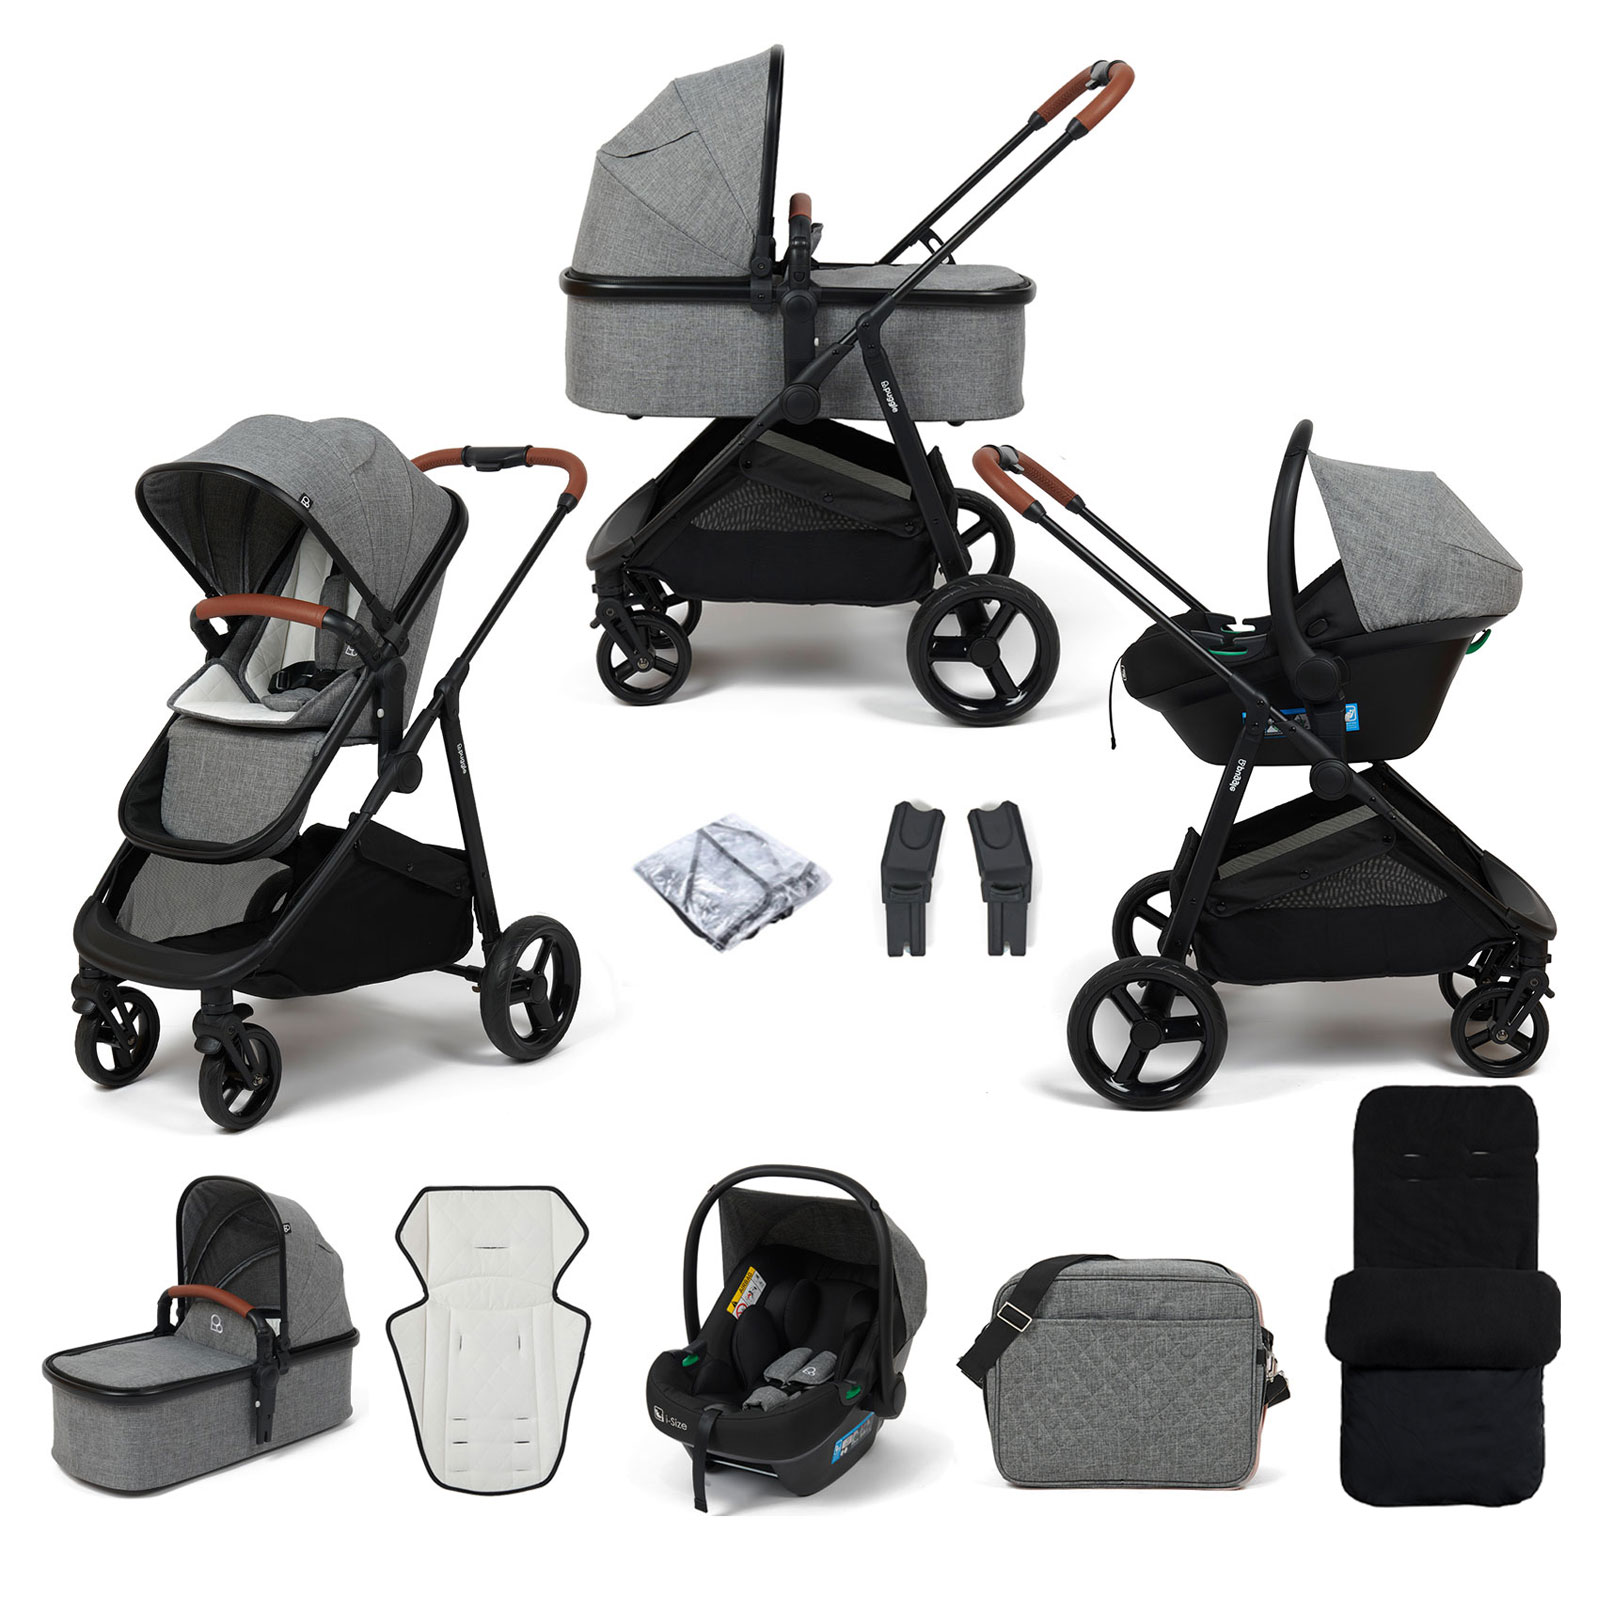 Puggle Monaco XT 3in1 i-Size Travel System with Changing Bag & Deluxe Footmuff - Graphite Grey